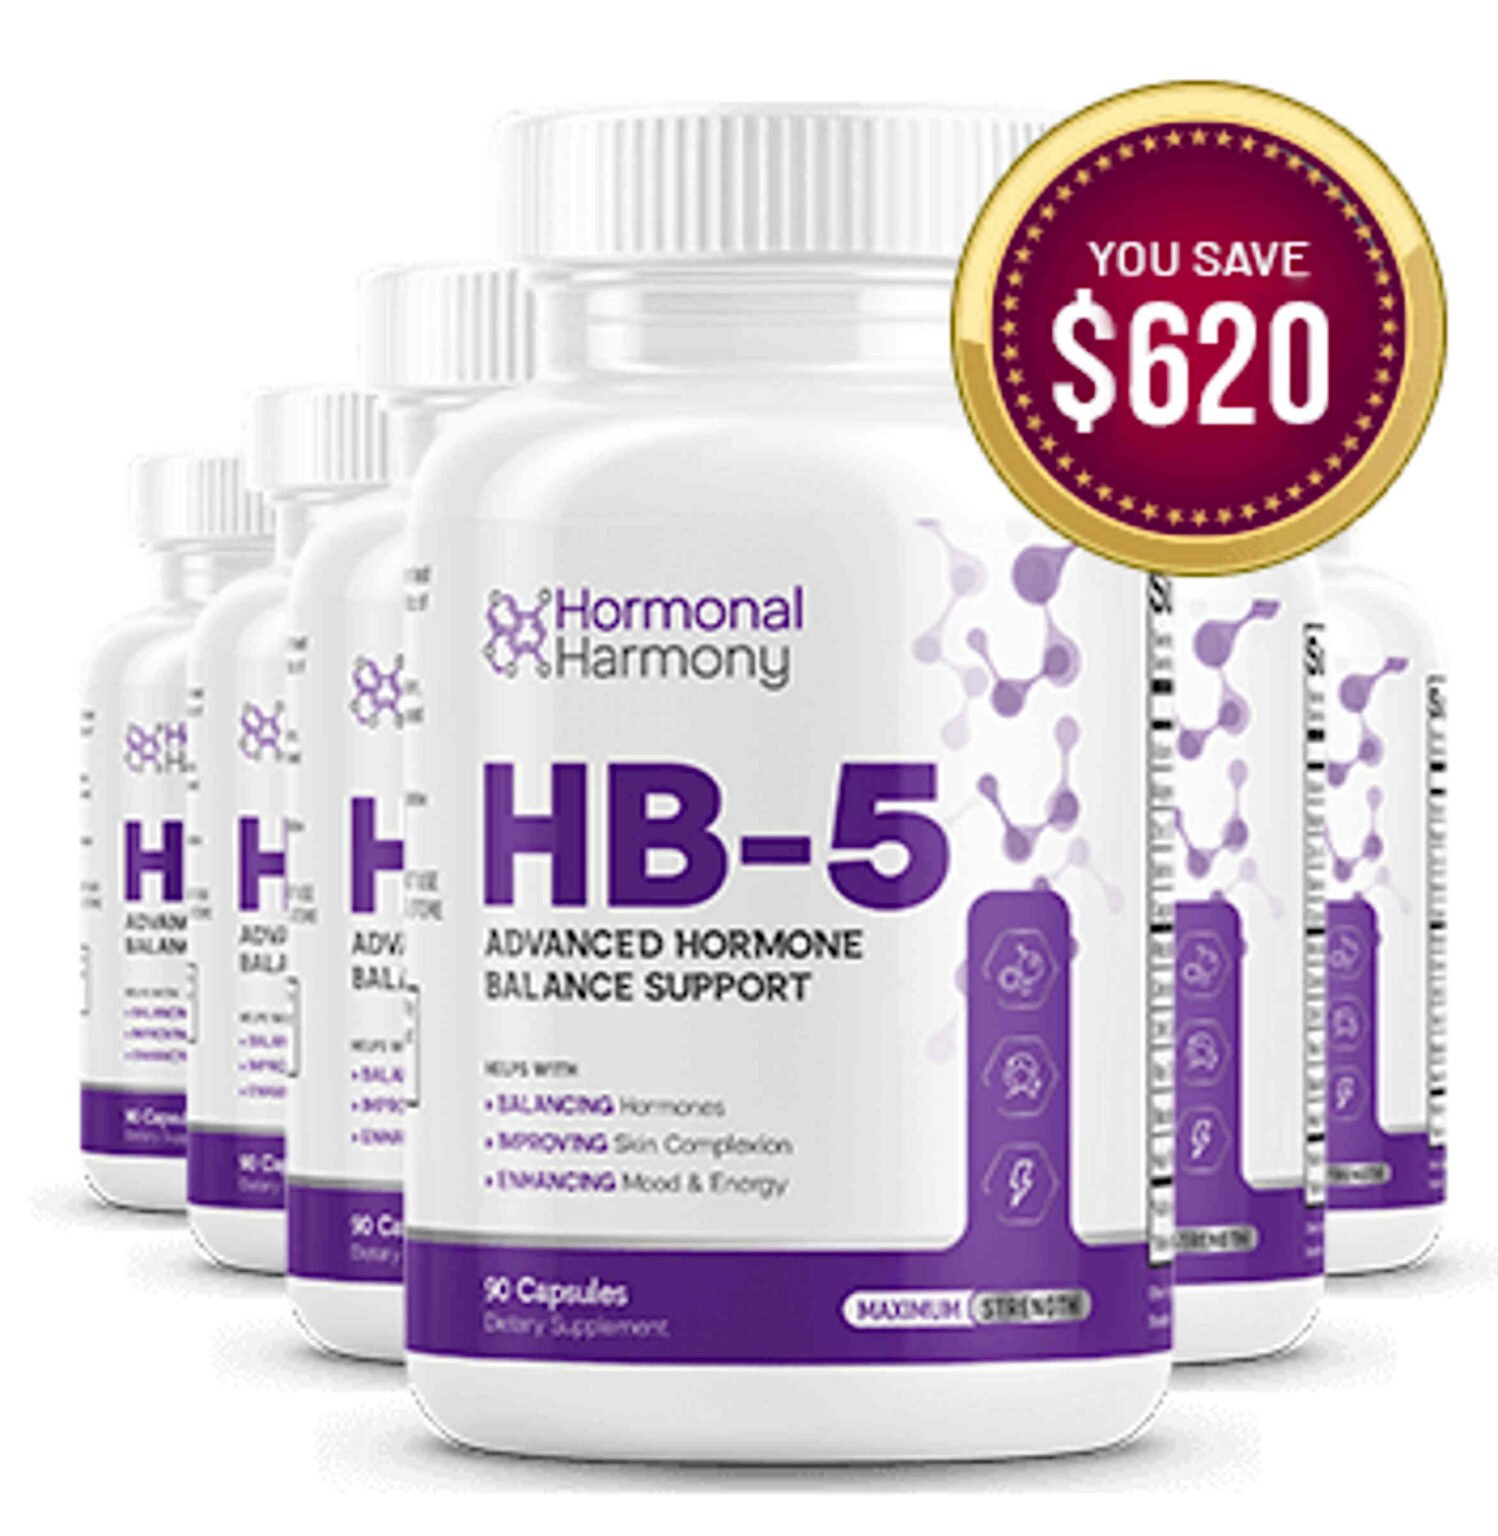 Need help losing weight and managing mental health symptoms? Here's how you can buy Hormonal Harmony HB5 supplements after consulting your doctor!